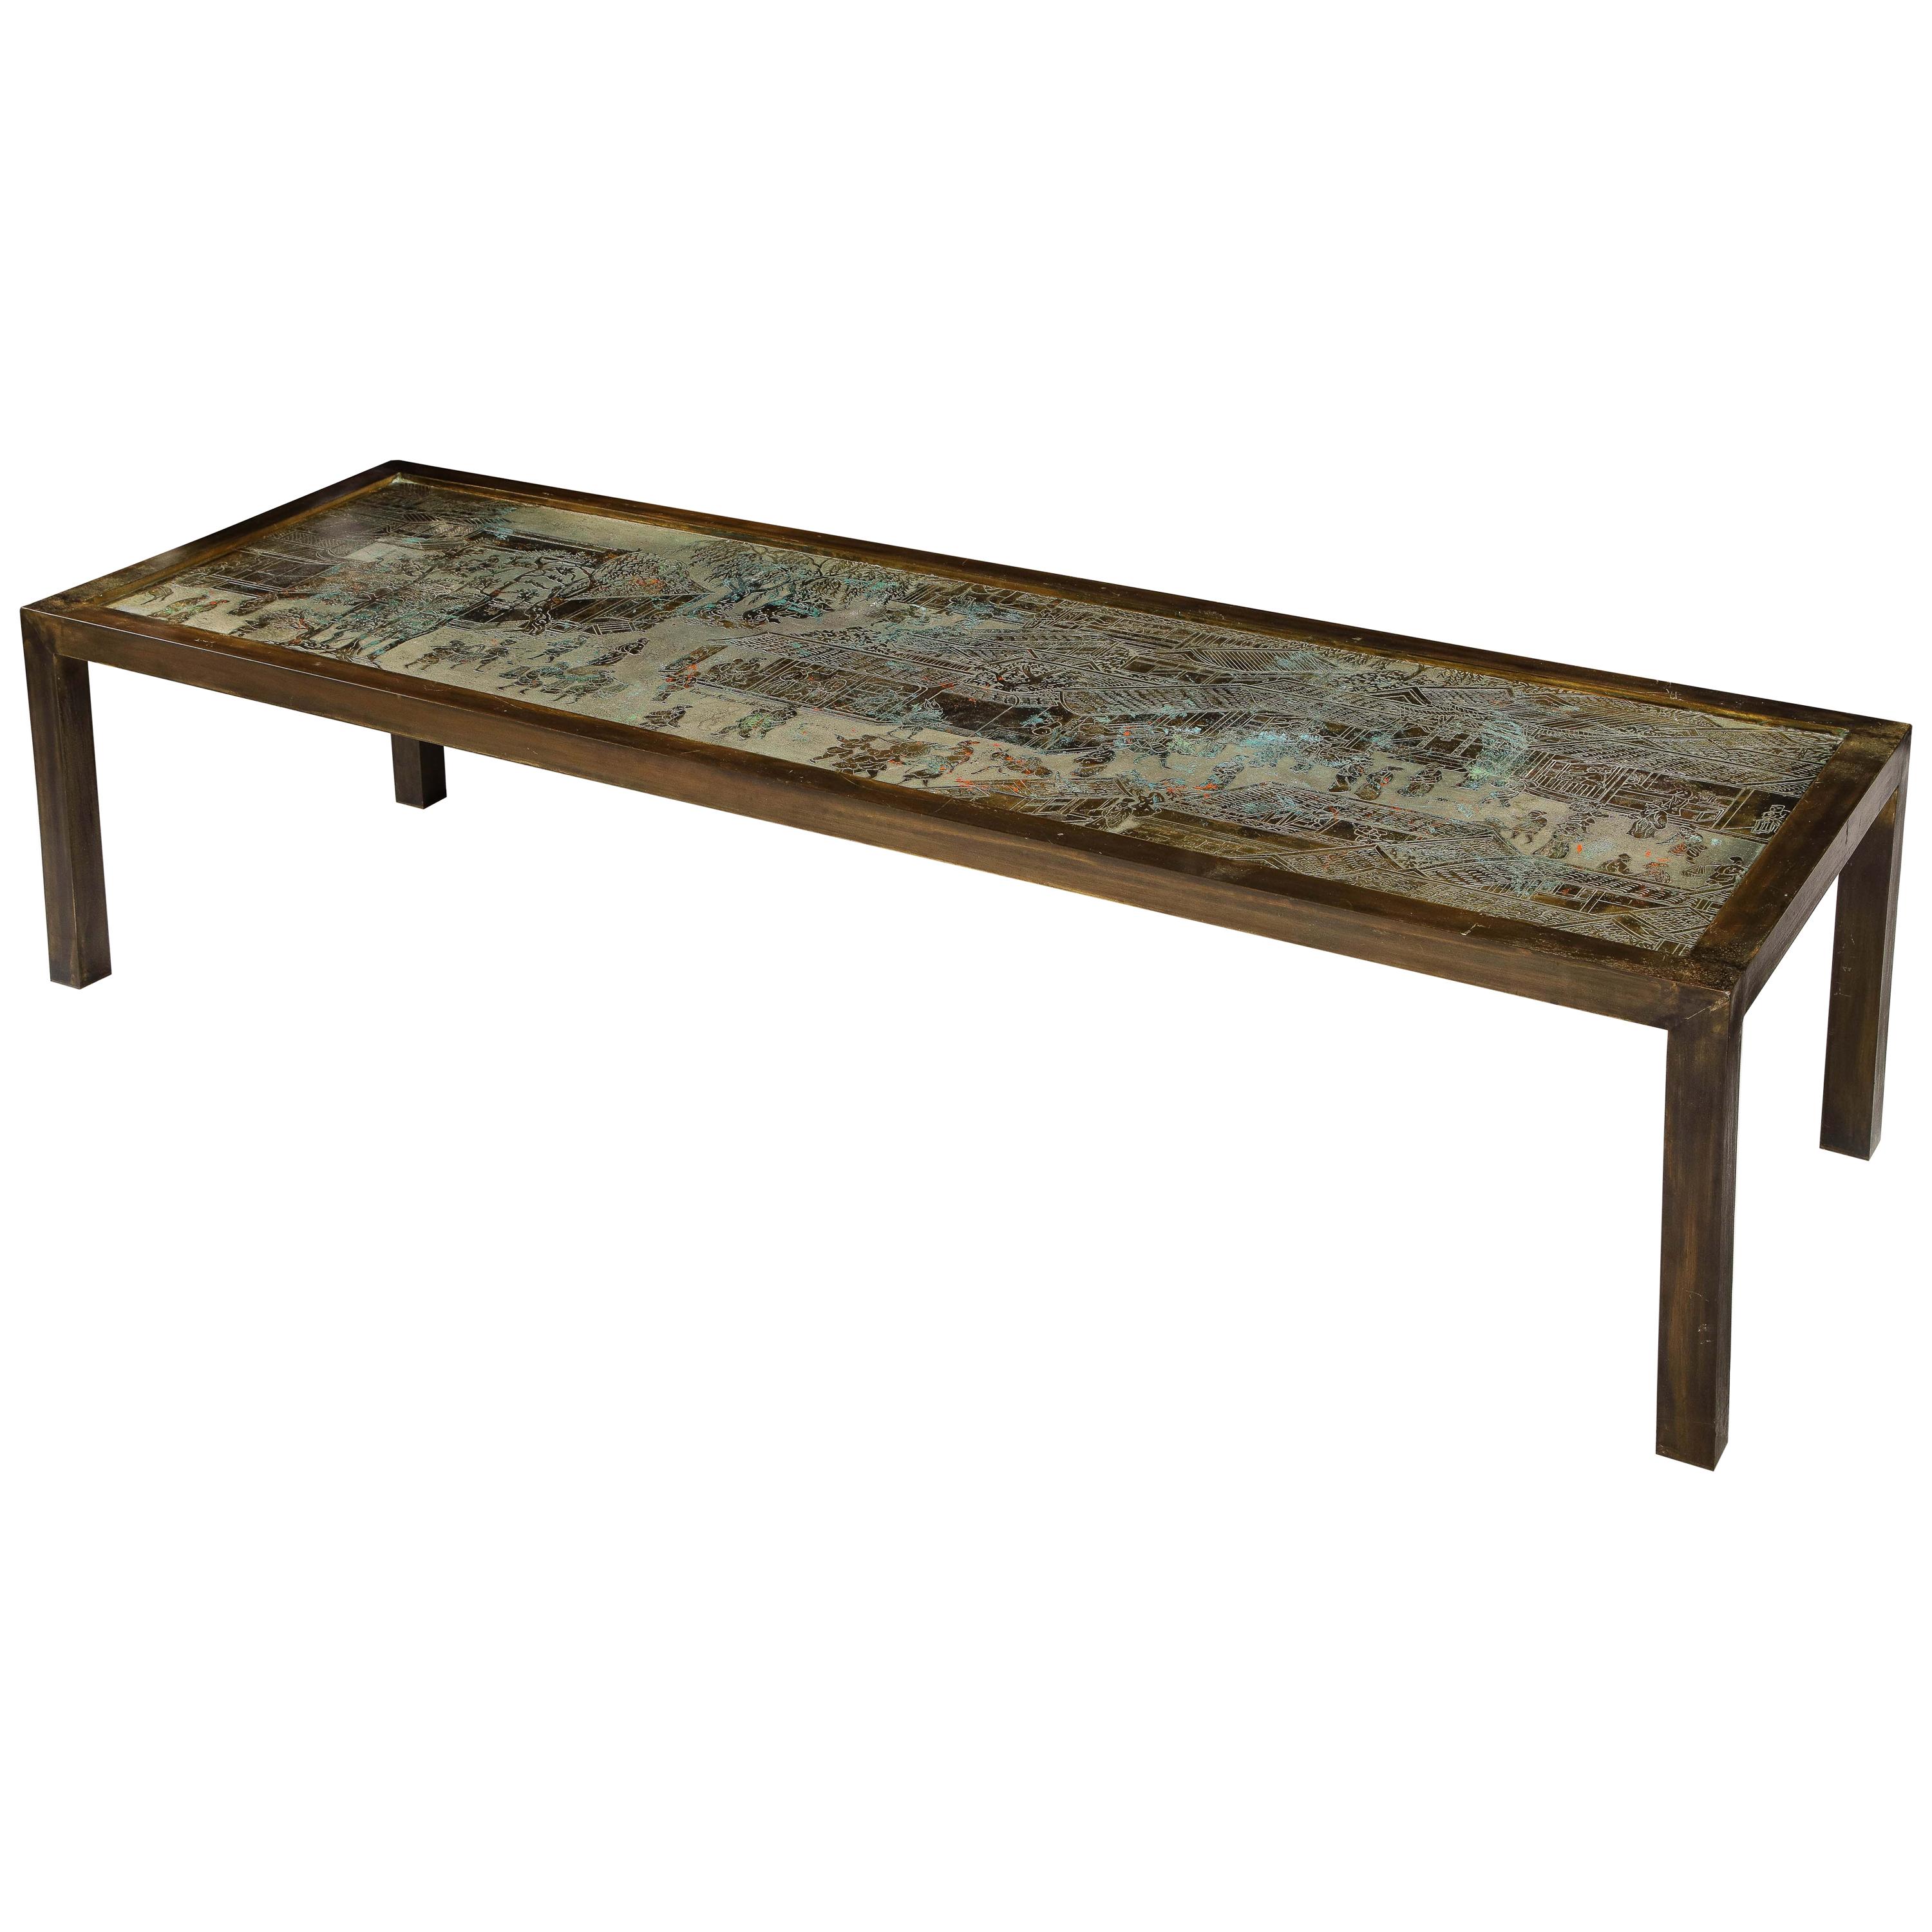 Signed Philip and Kelvin LaVerne Large Size Chinoiserie Table in Etched Bronze